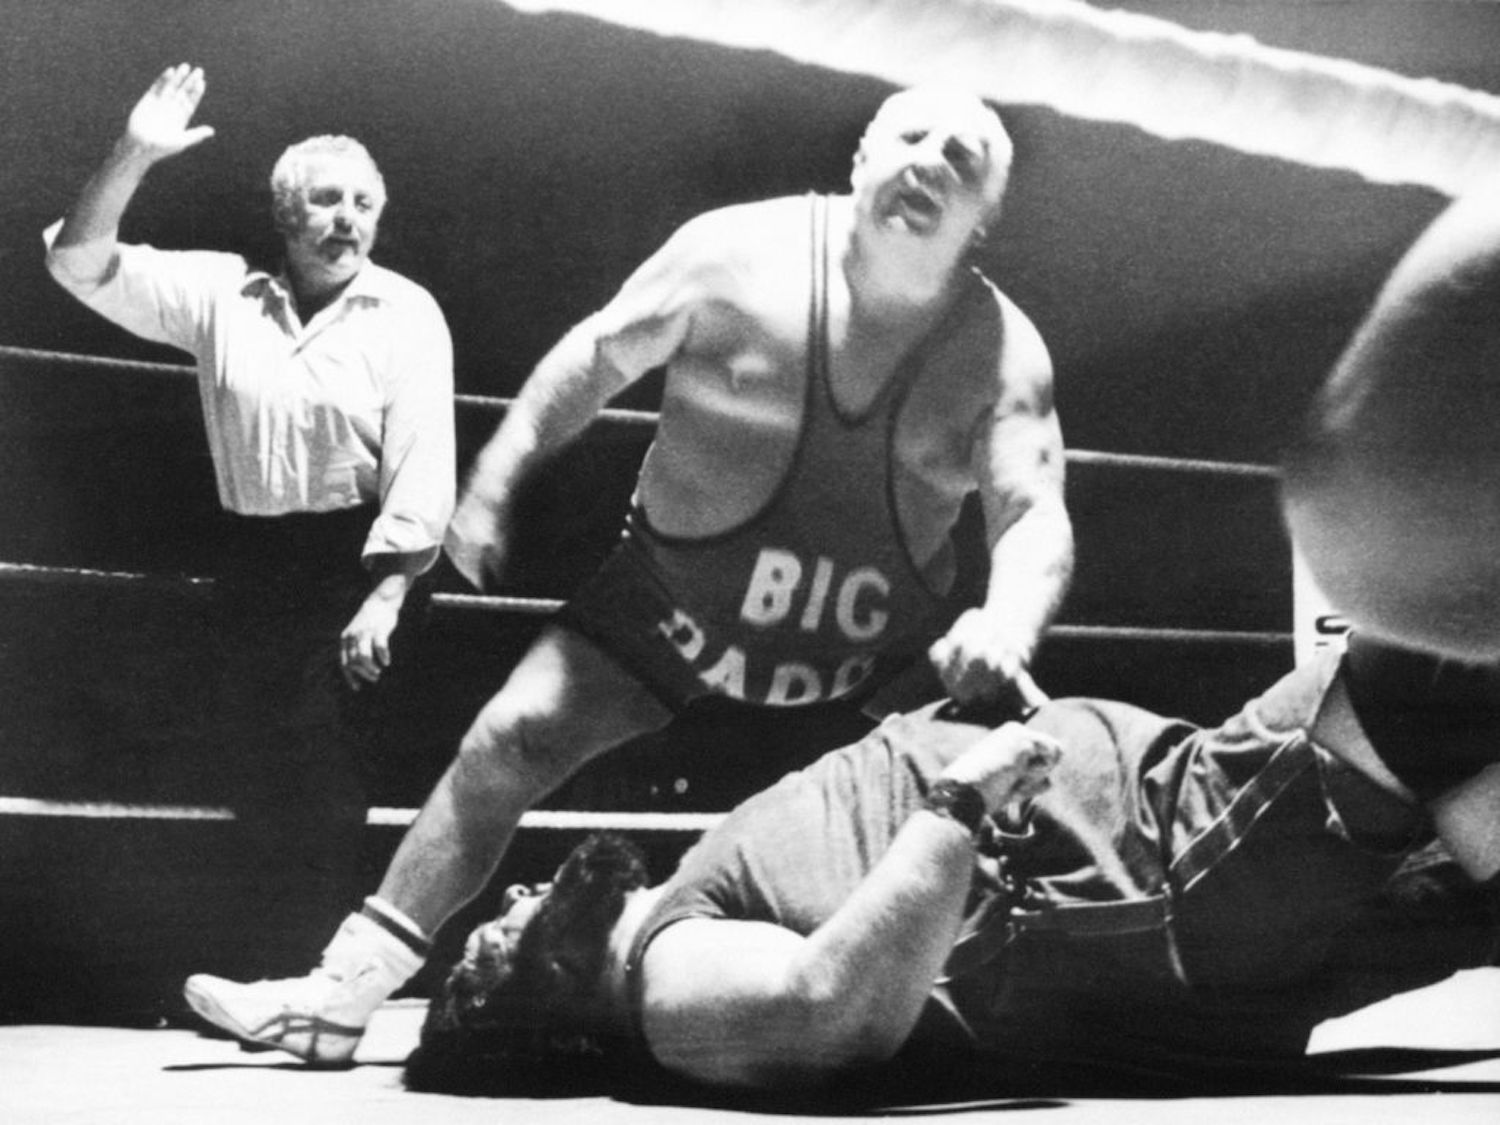 The Tragic Death of Pro Wrestler Malcolm “King Kong” Kirk, Who Died in the Ring